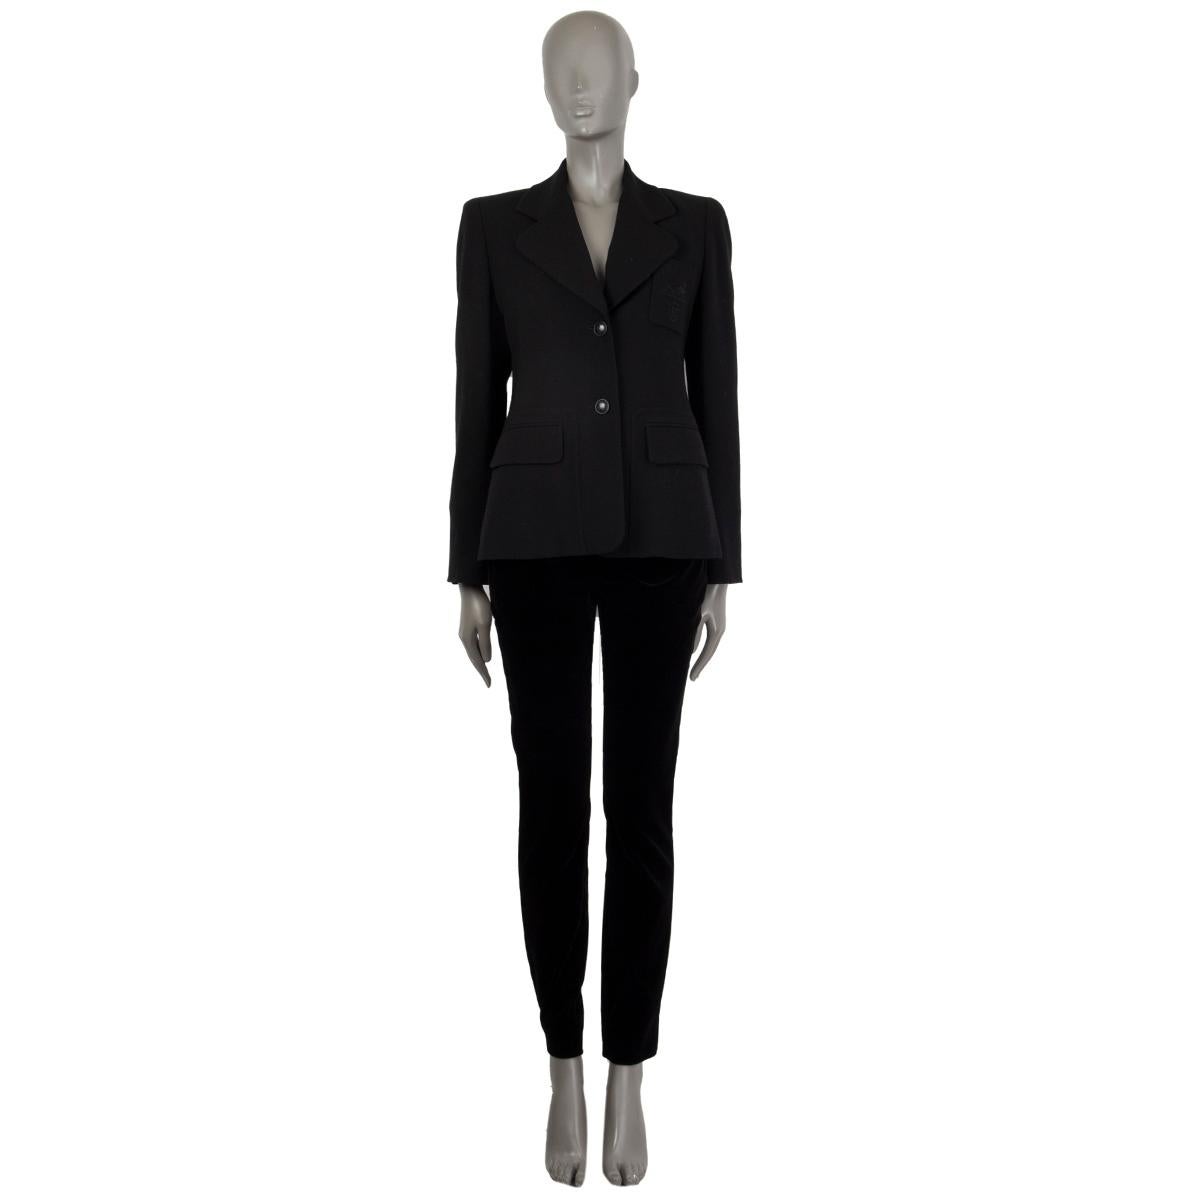 Hermes blazer in black wool (100%). With wide notch collar, chest pocket with brand insignia, two flap pockets on the front sides, two slit on the back, and one-button sleeves. Closes with black H buttons on the front. Lined in black pin-striped